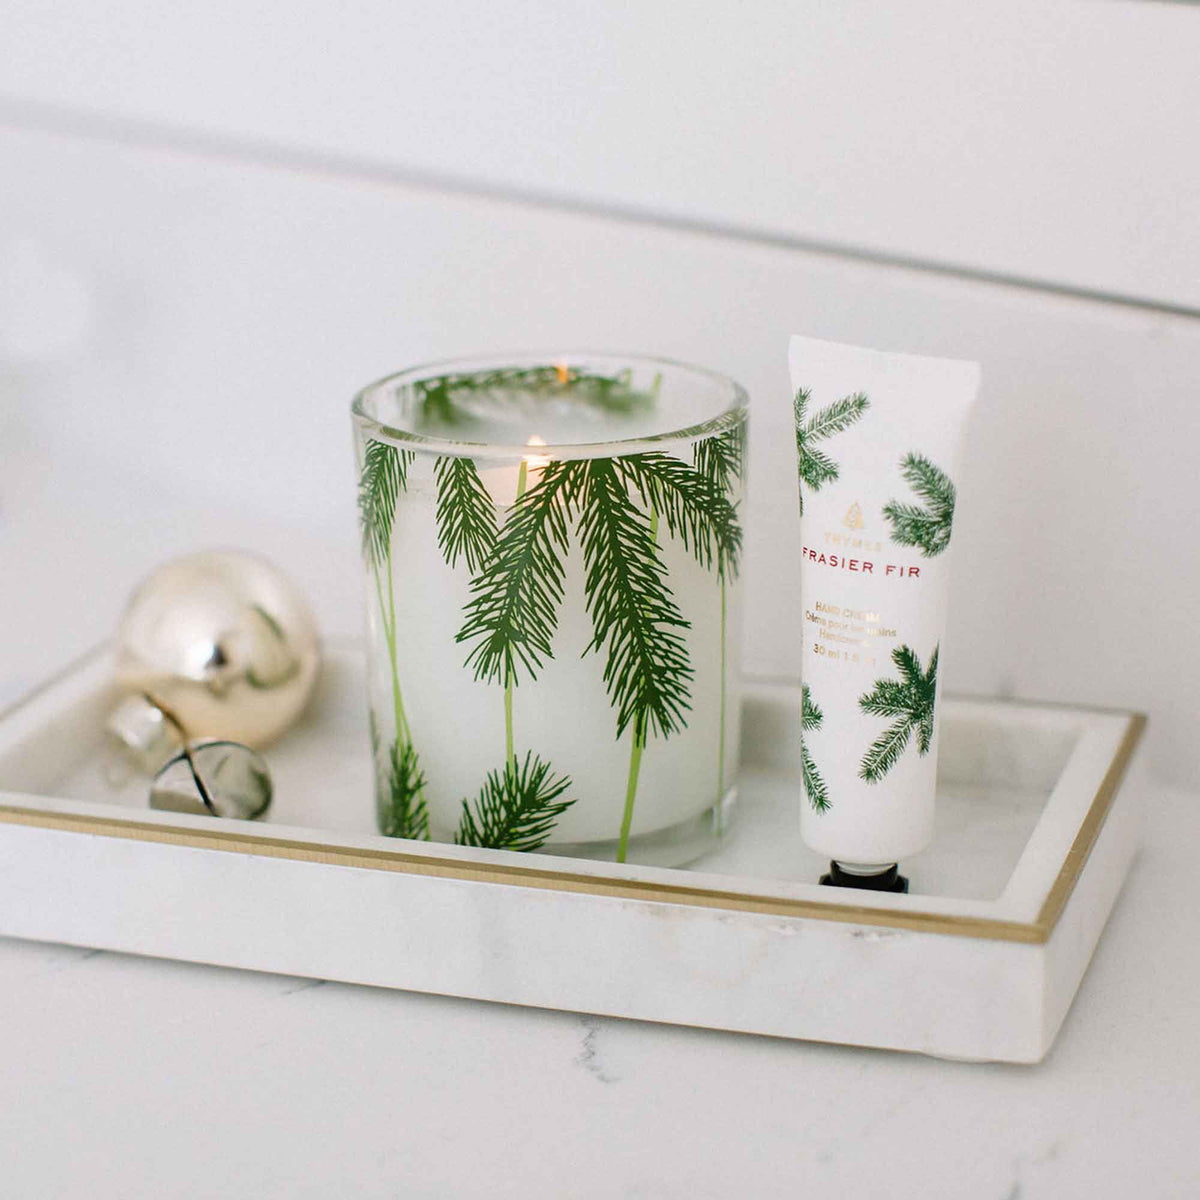 Thymes - Frasier Fir Statement Travel Tin Candle at